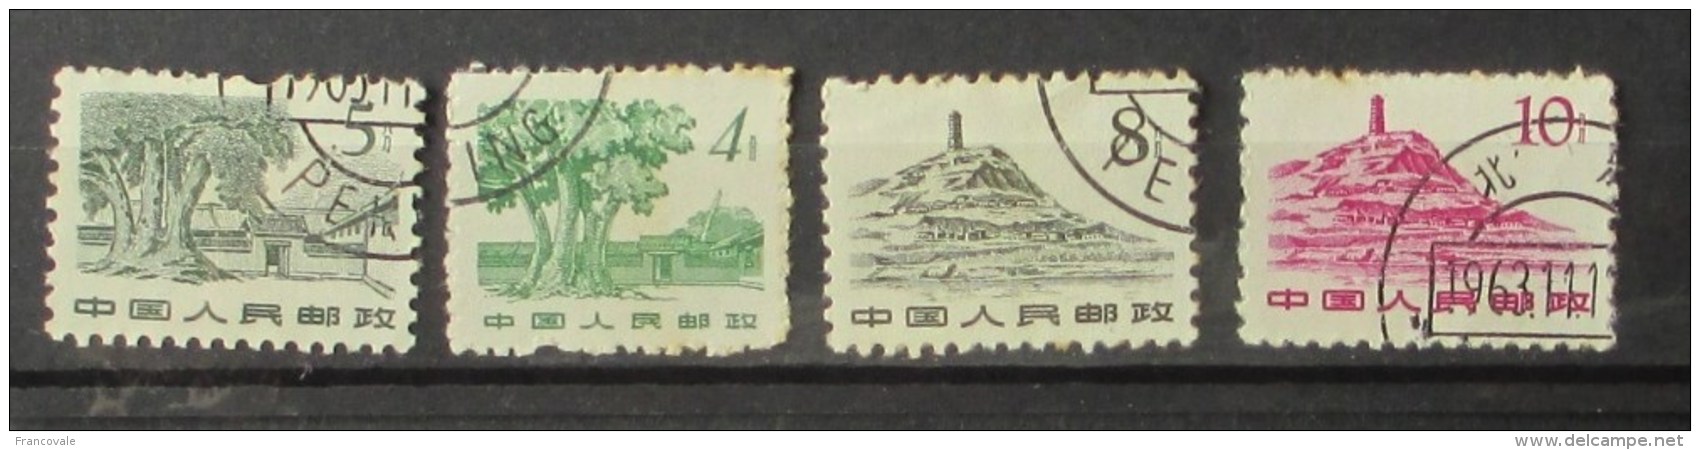 Cina 1962 Landscapes And Architecture 4 Stamps - Gebruikt